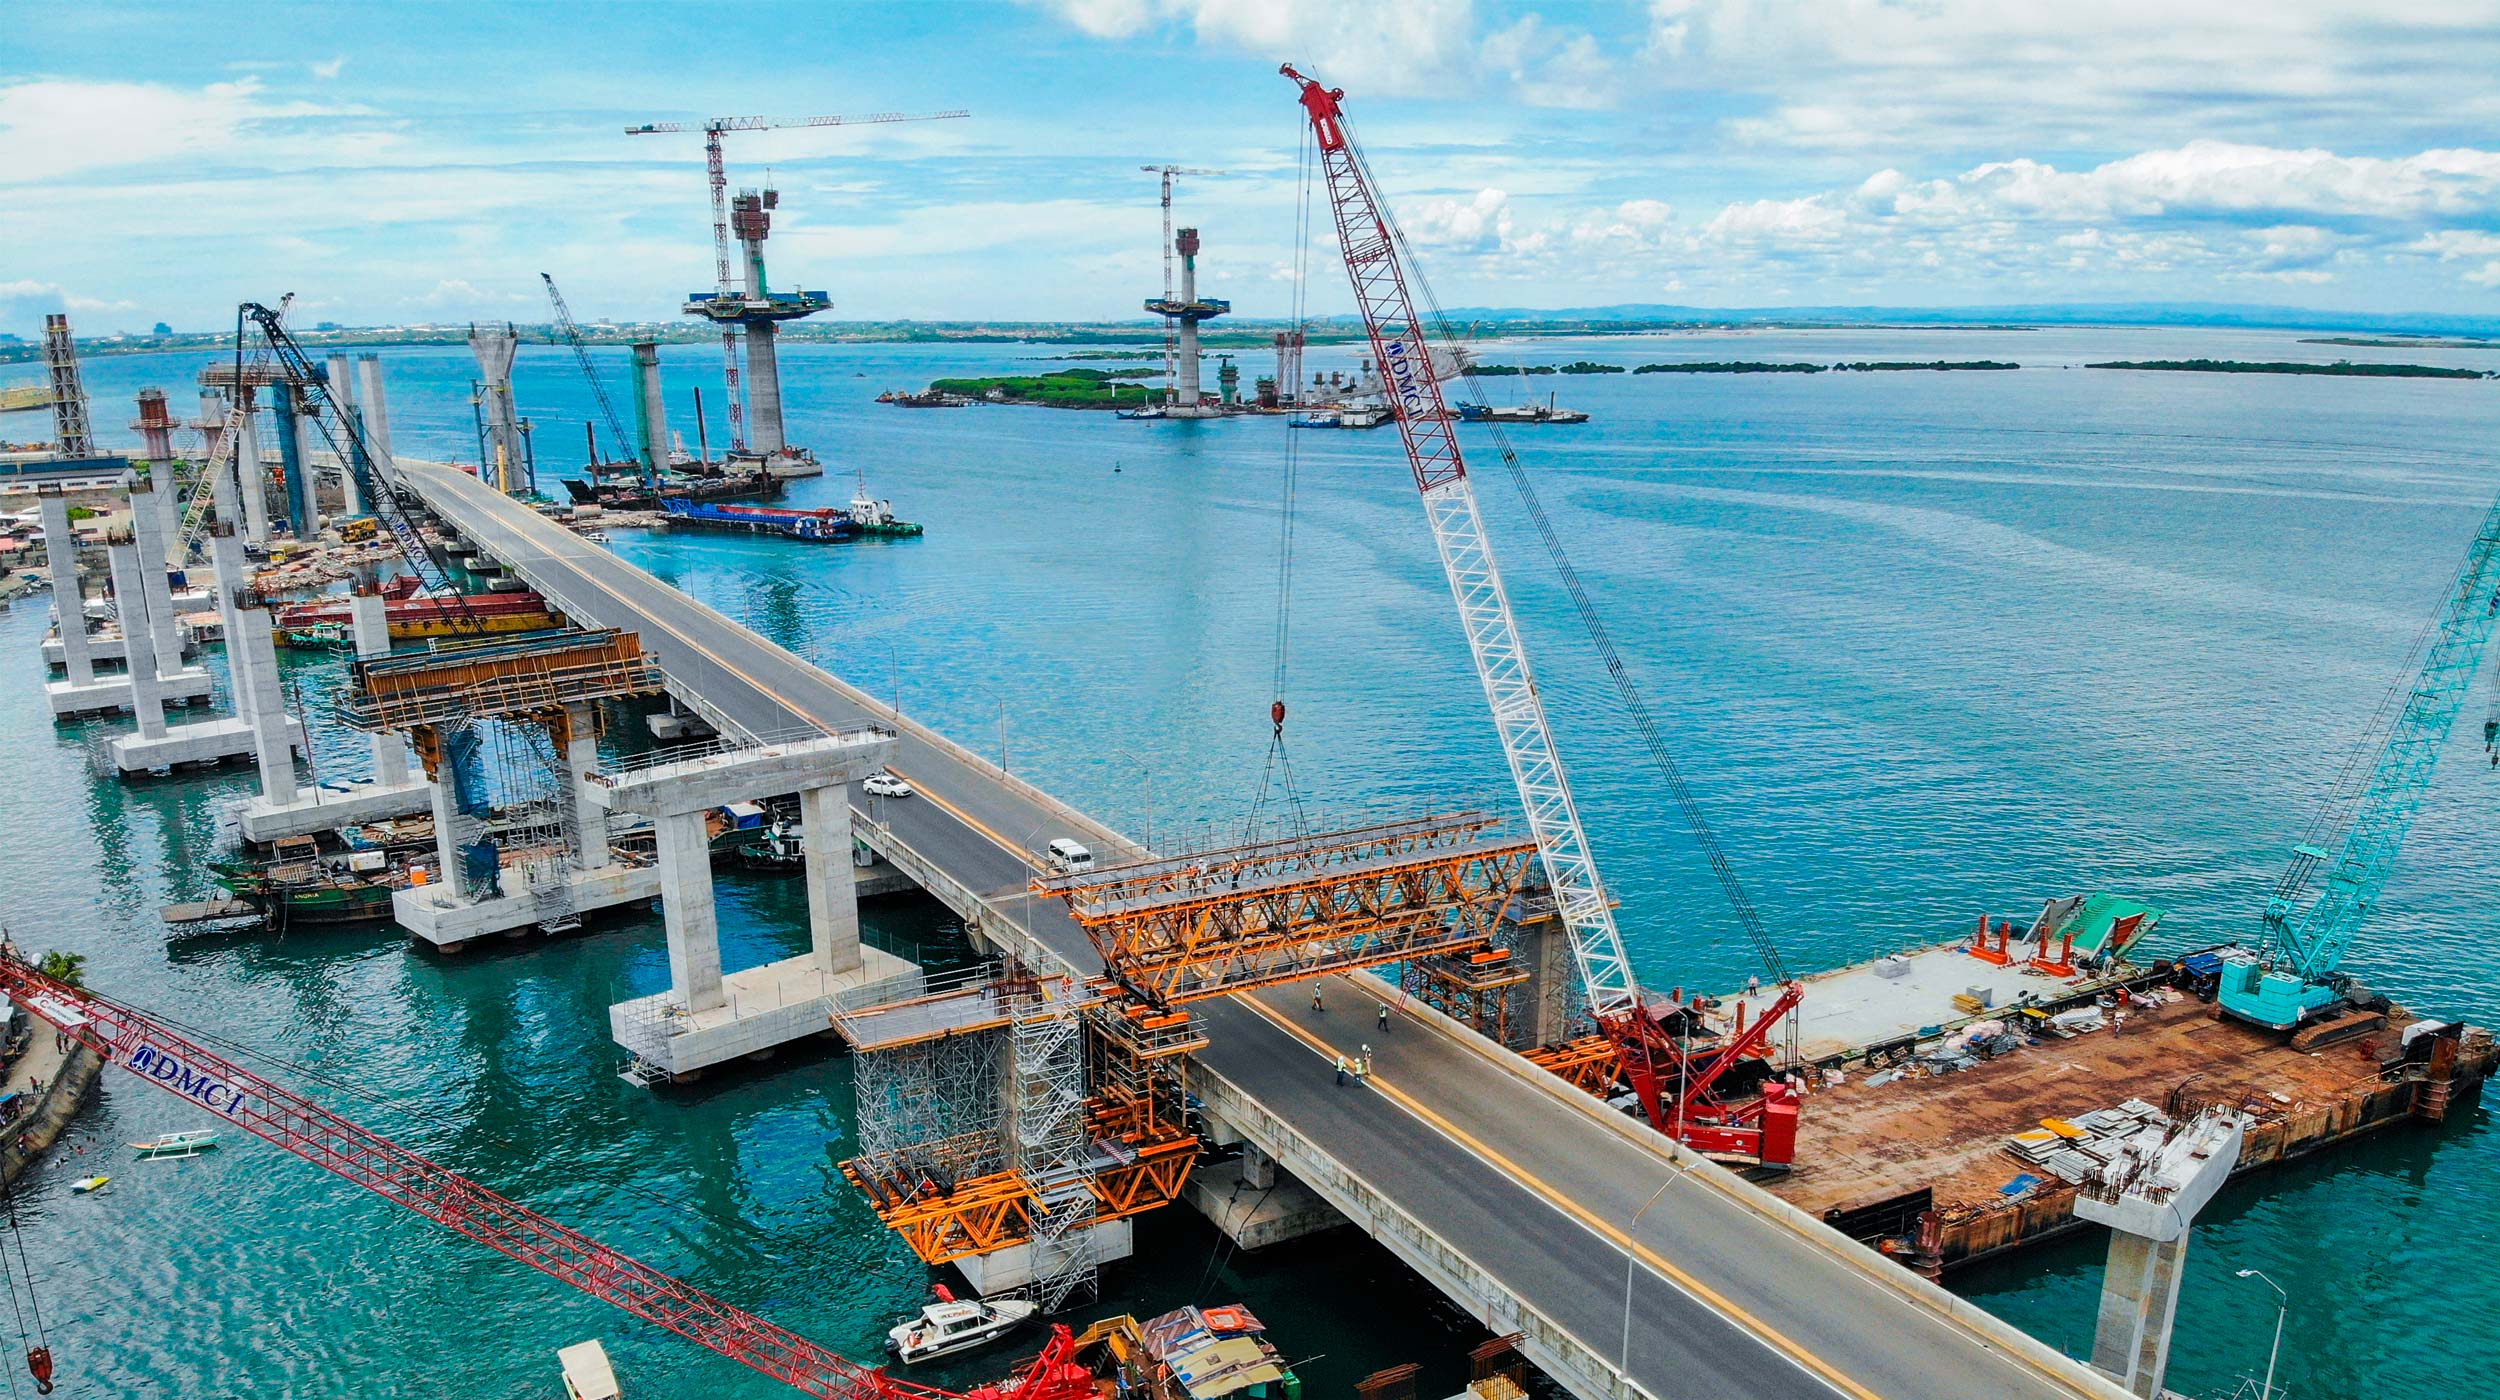 'The Cebu—Cordova Link Expressway' is Cebu's most anticipated infrastructure project and one of the largest in the Philippines. It aims to alleviate the heavy traffic between Cordova – the capital of Cebu Island and the second largest city in the Philippines – and Mactan.